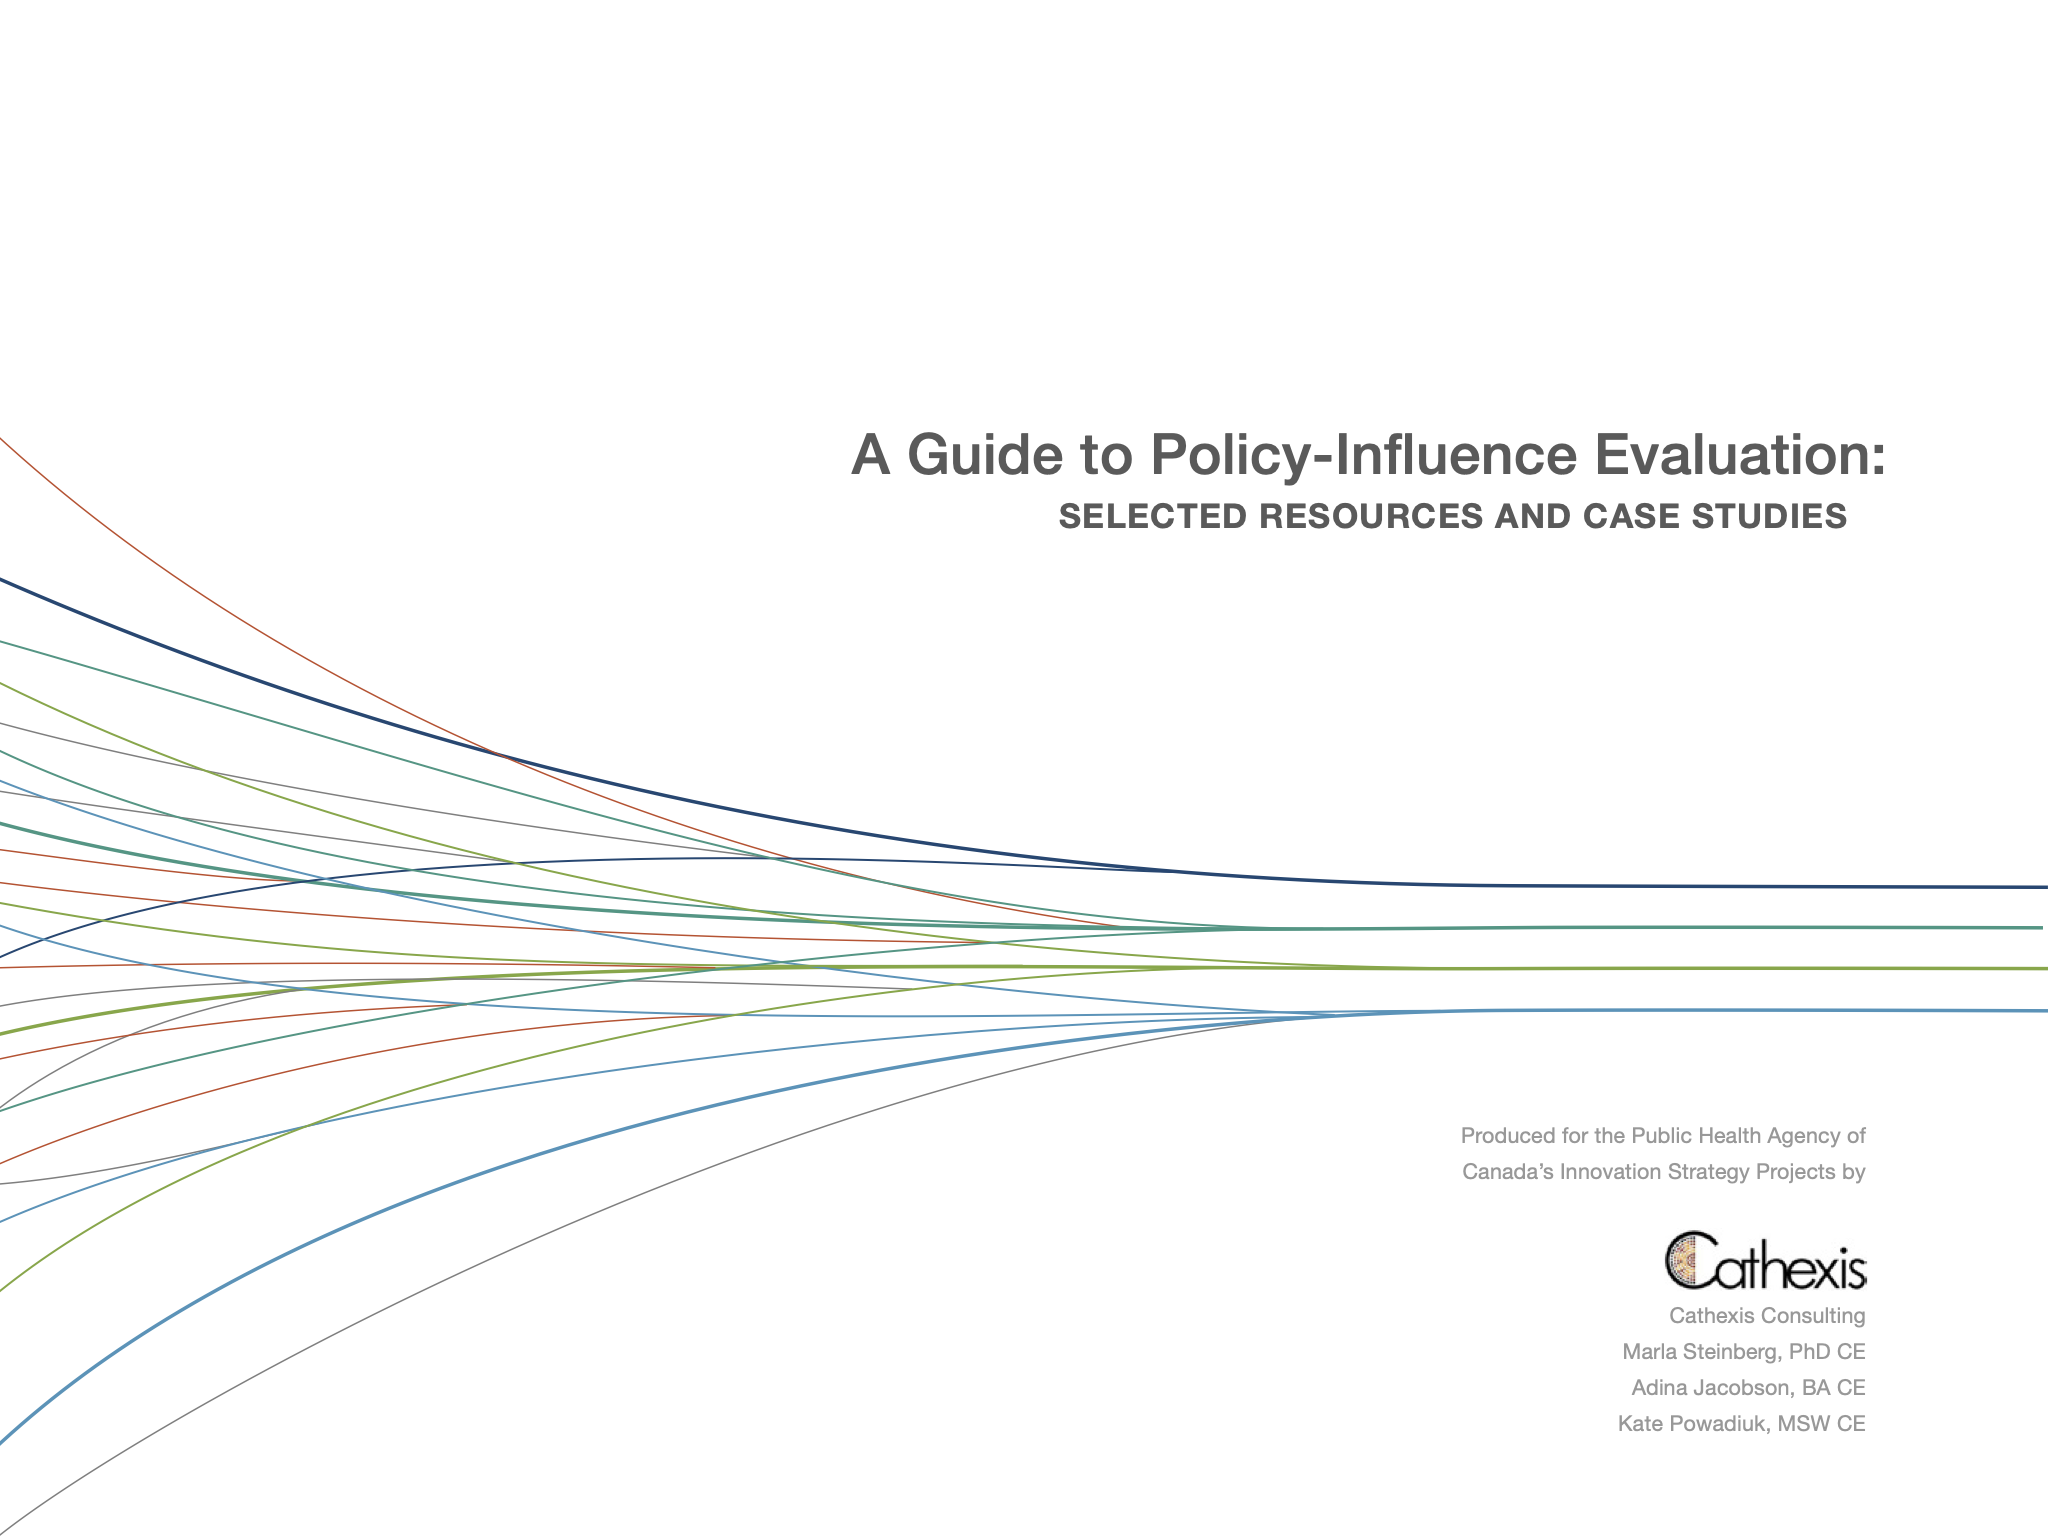 A Guide to Policy-Influence Evaluation: Selected Resources and Case Studies